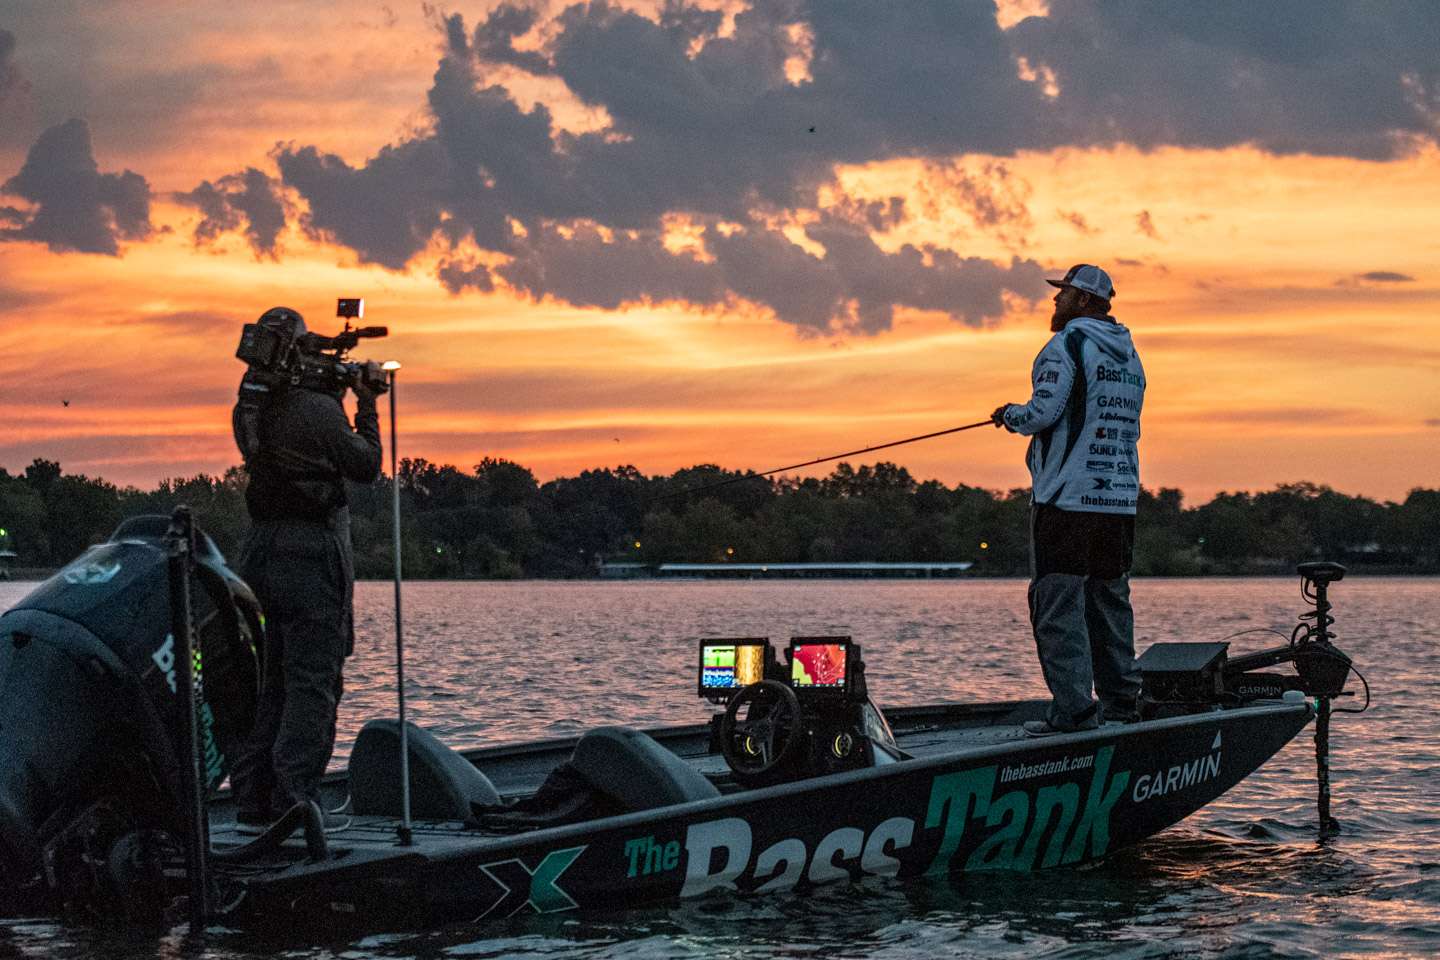 Head out early with John Soukup and Nick LeBrun on the final day of the 2021 Basspro.com Bassmaster Open at Grand Lake!